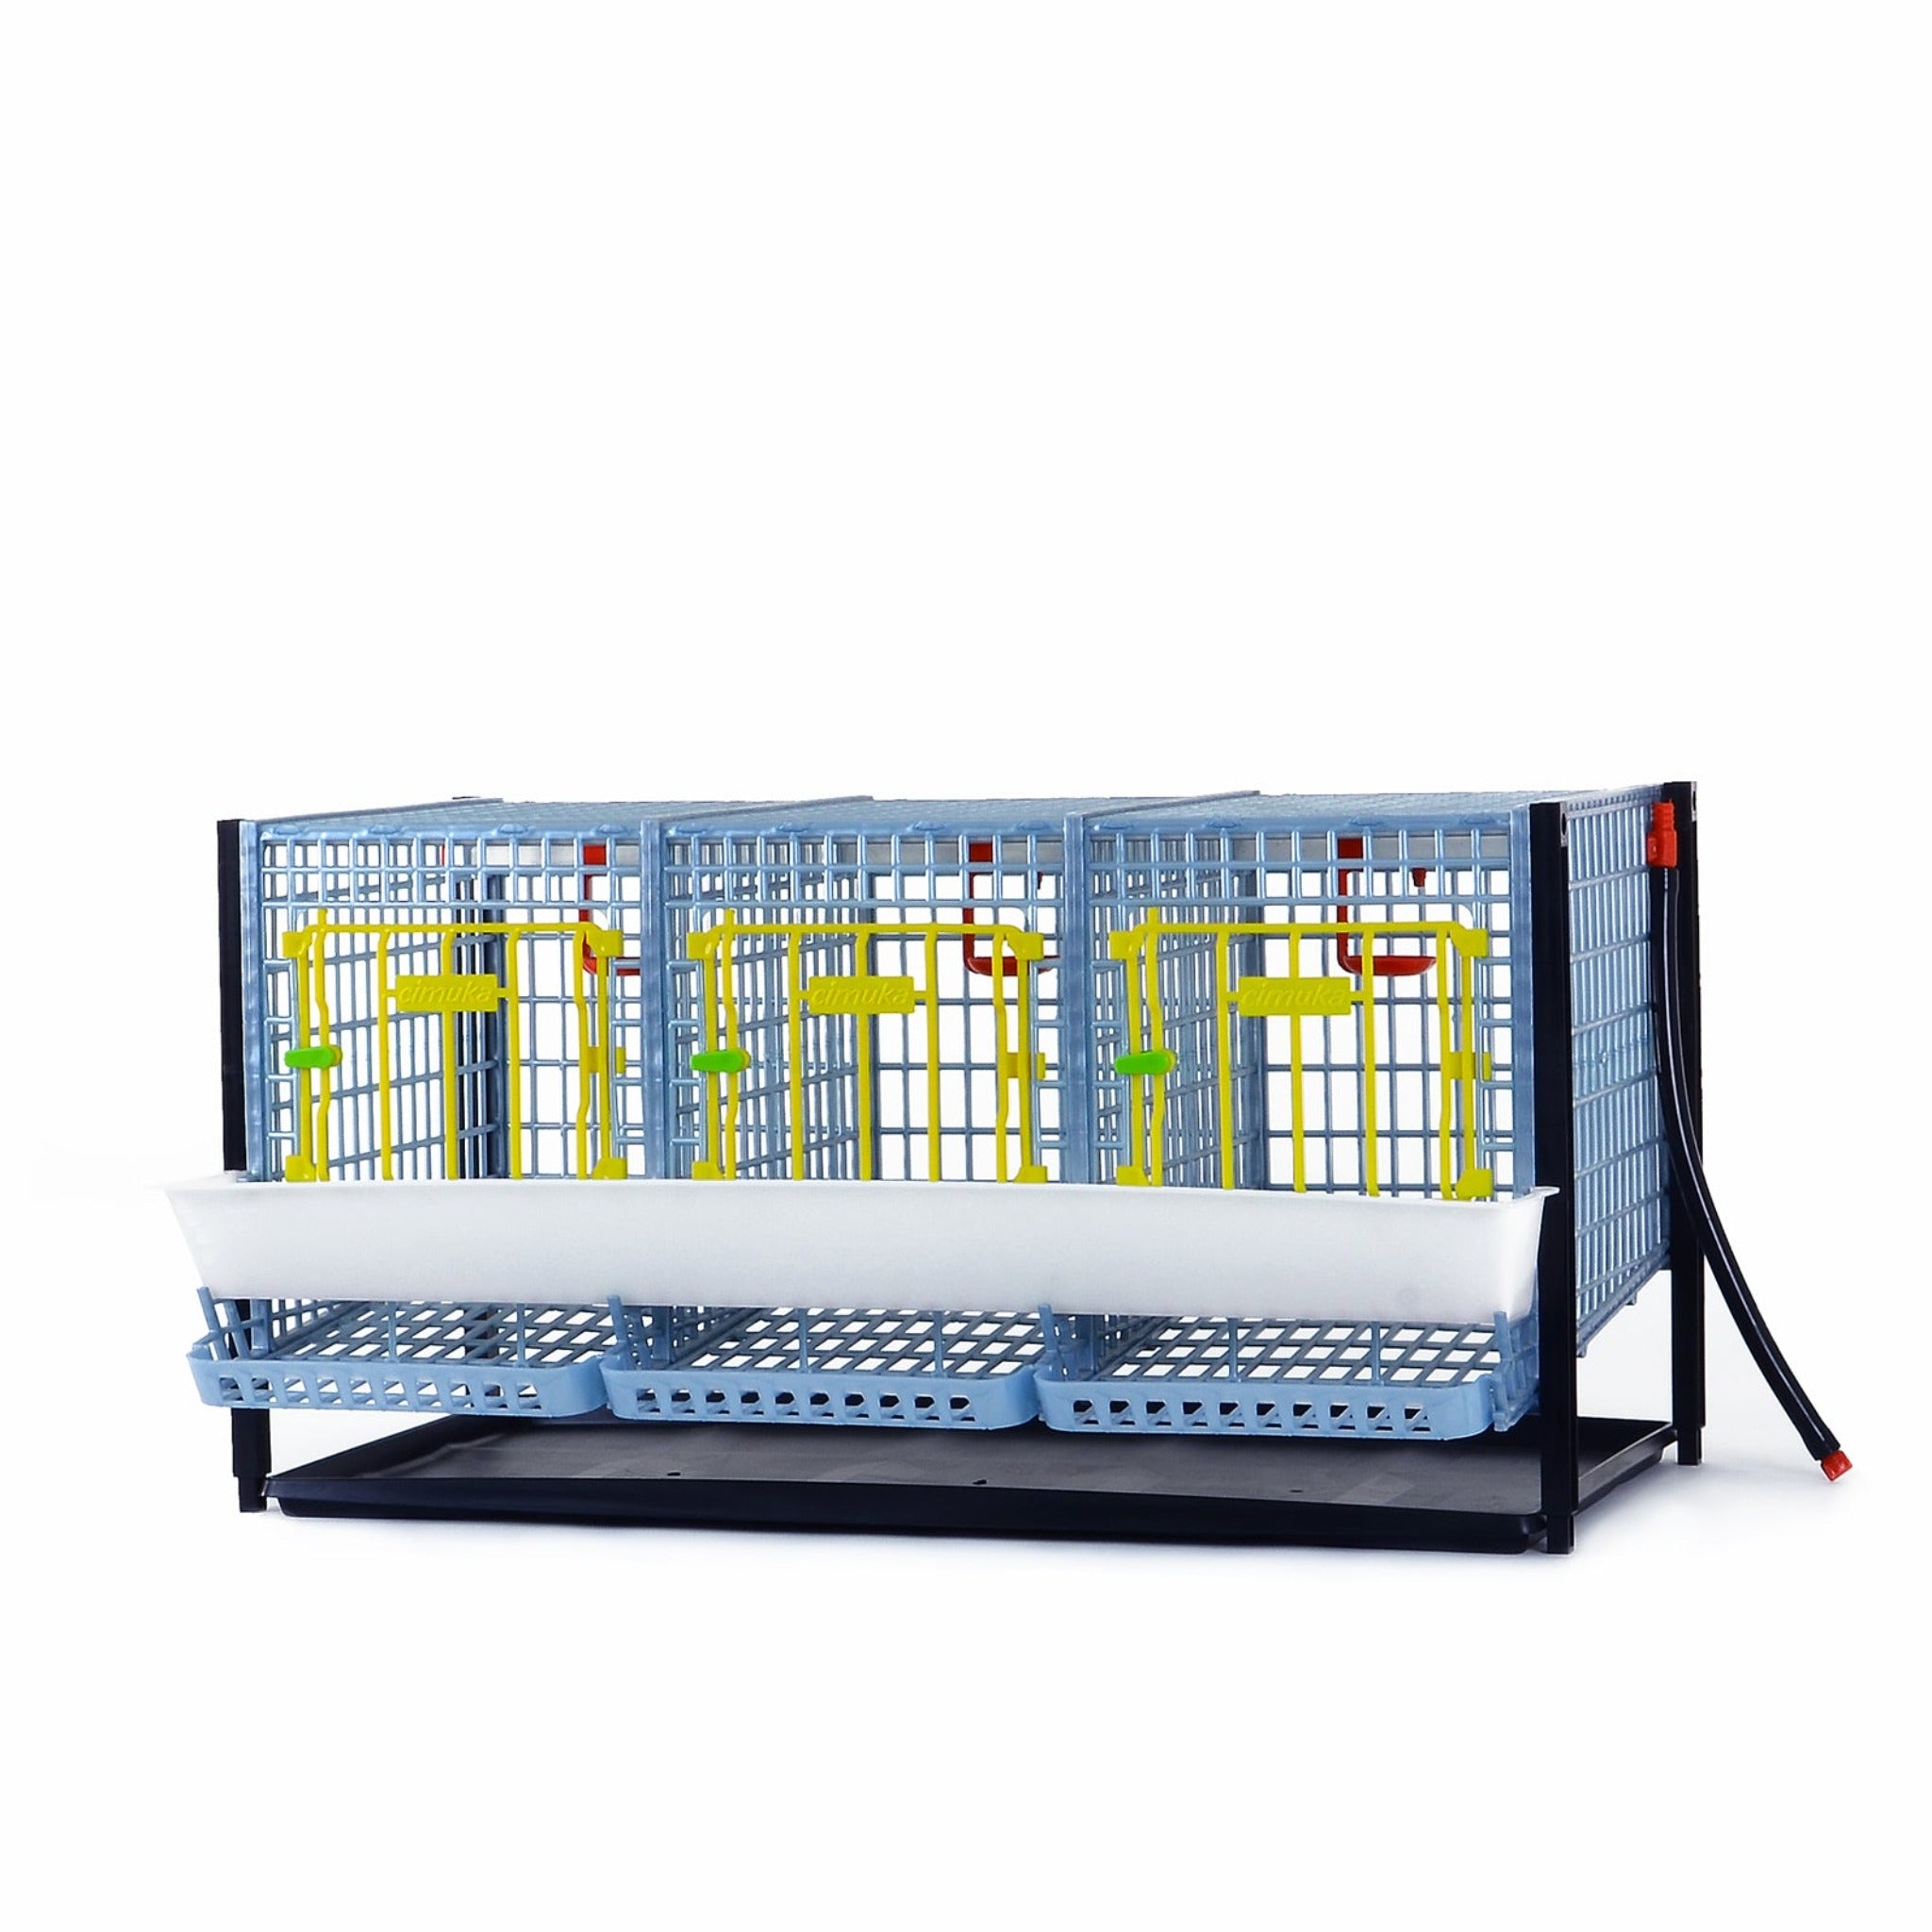 Hatching Time Cimuka. TYK40 15” Chicken cage layer addition. Image shows chicken cage front. Roll out egg trays can be seen on front under feeding trough. Water hose going down for automatic drinker system on side of cage..